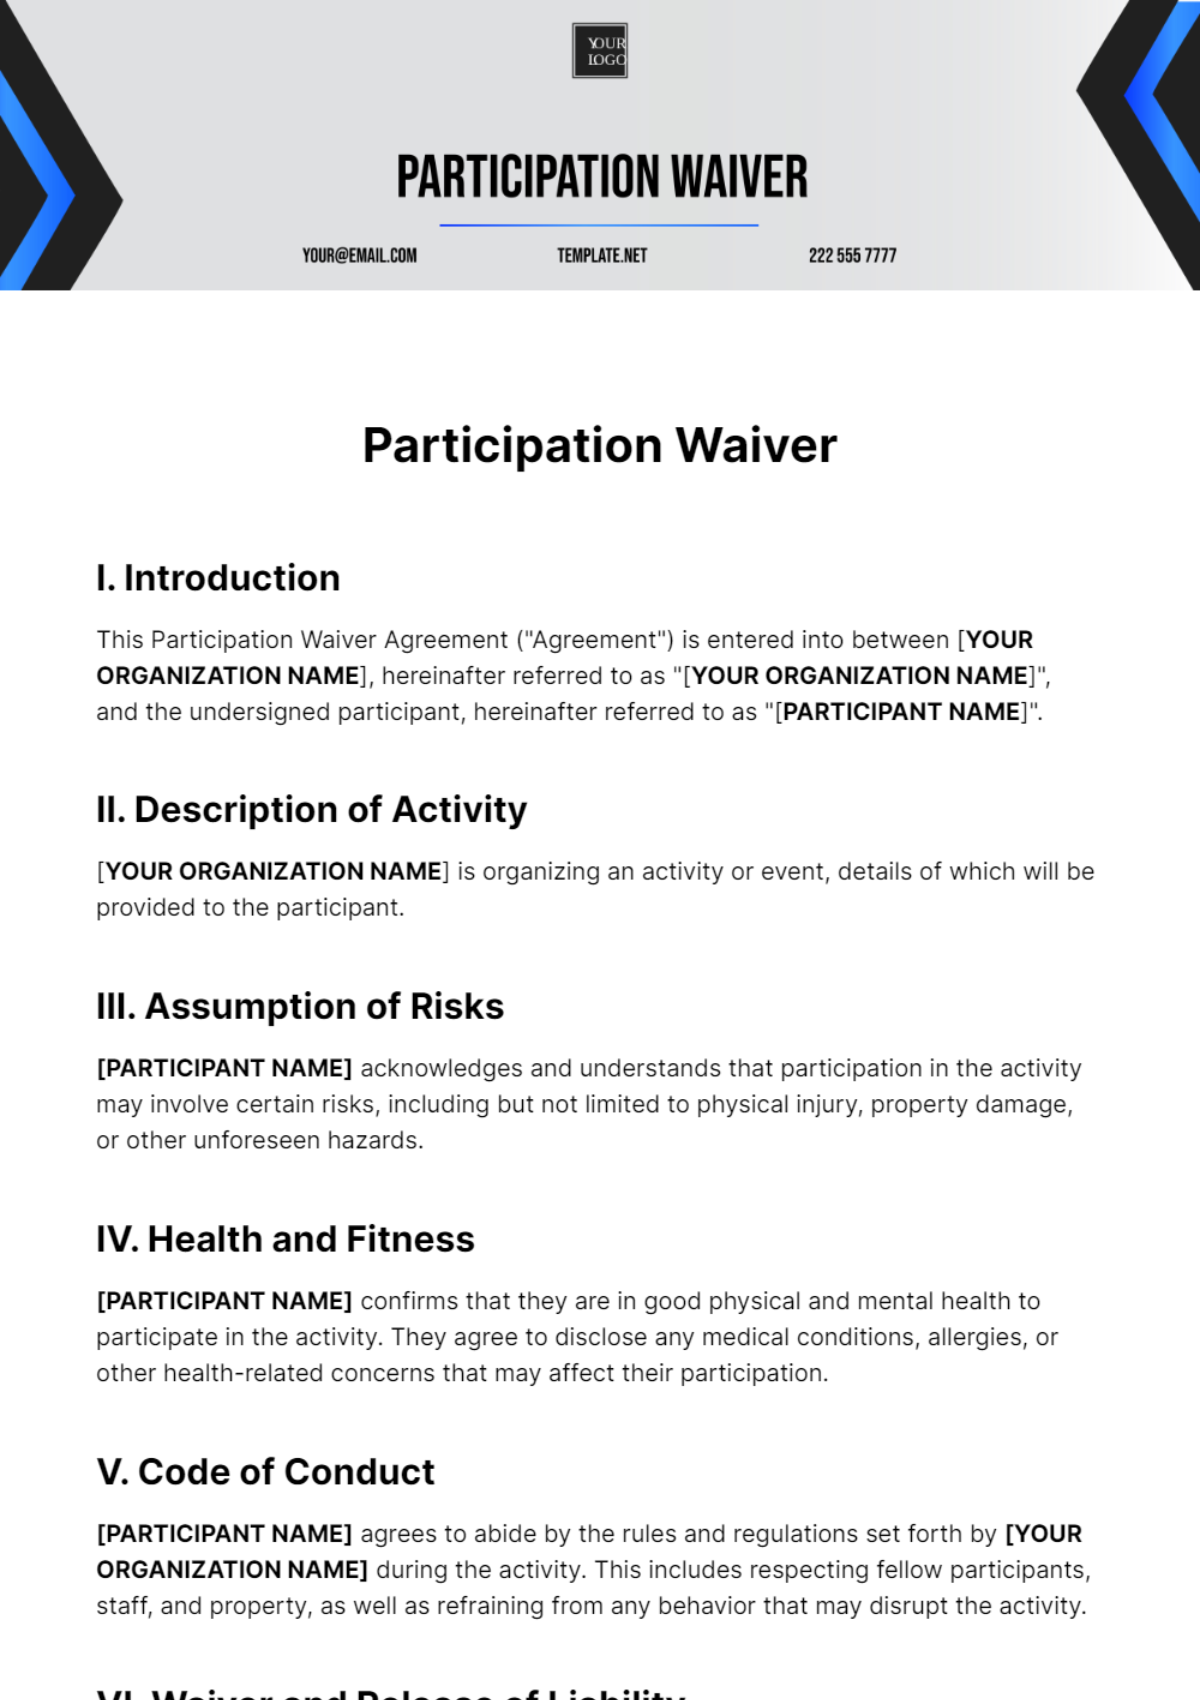 Free Participation Waiver Template